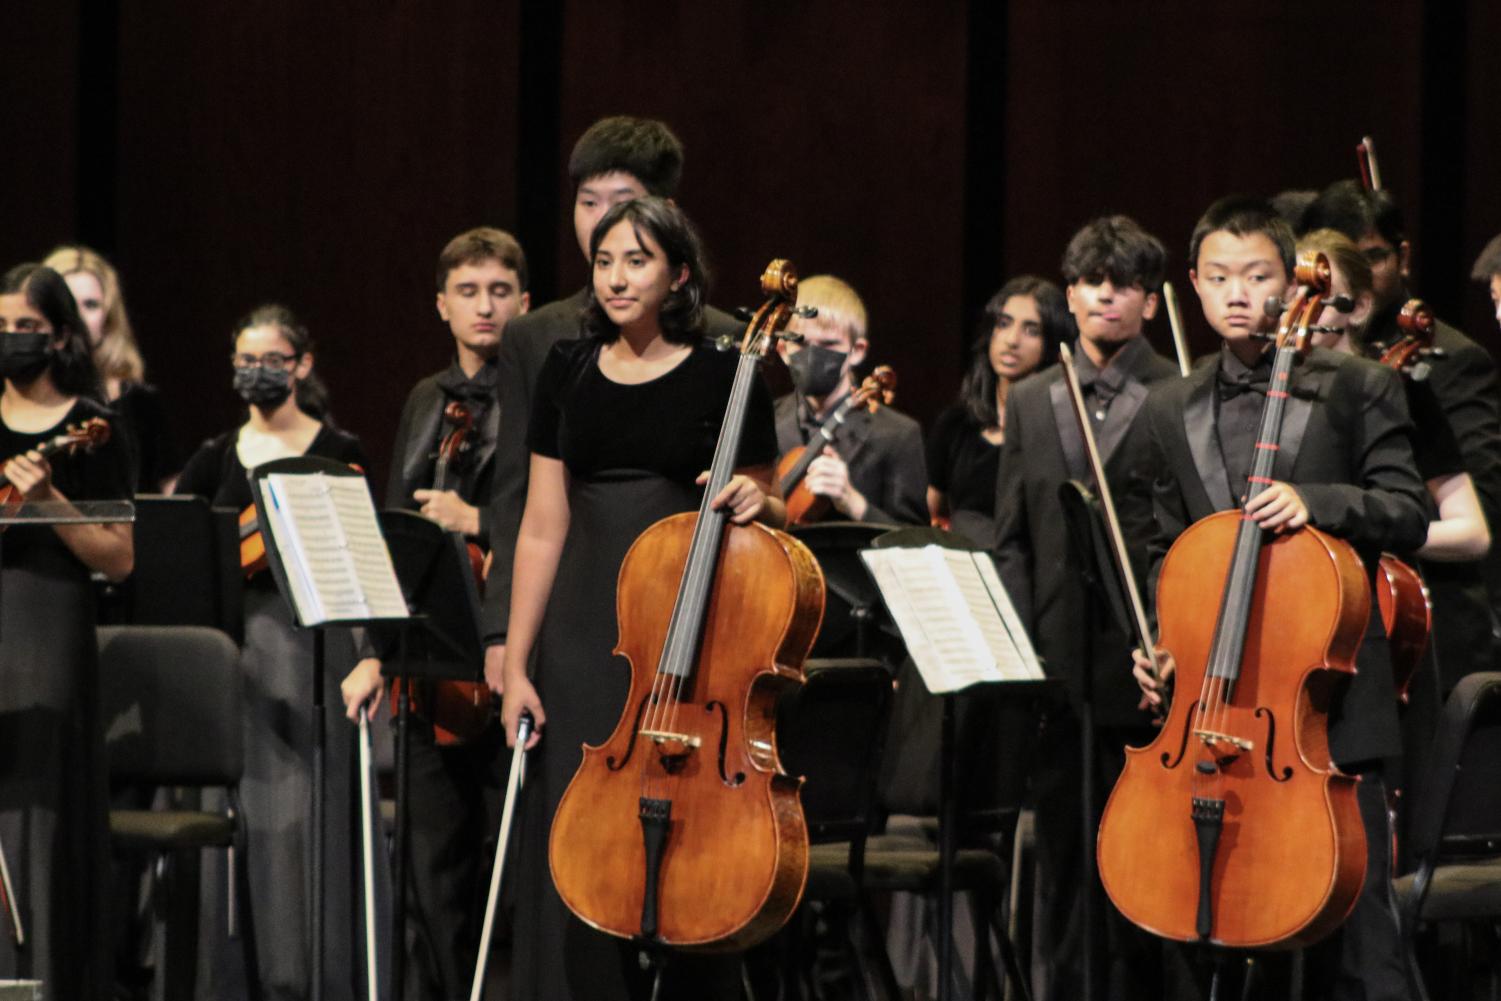 Orchestra+Delivers+Radiant+Performance+at+Fall+Concert%2C+an+Evening+of+Diverse+Music